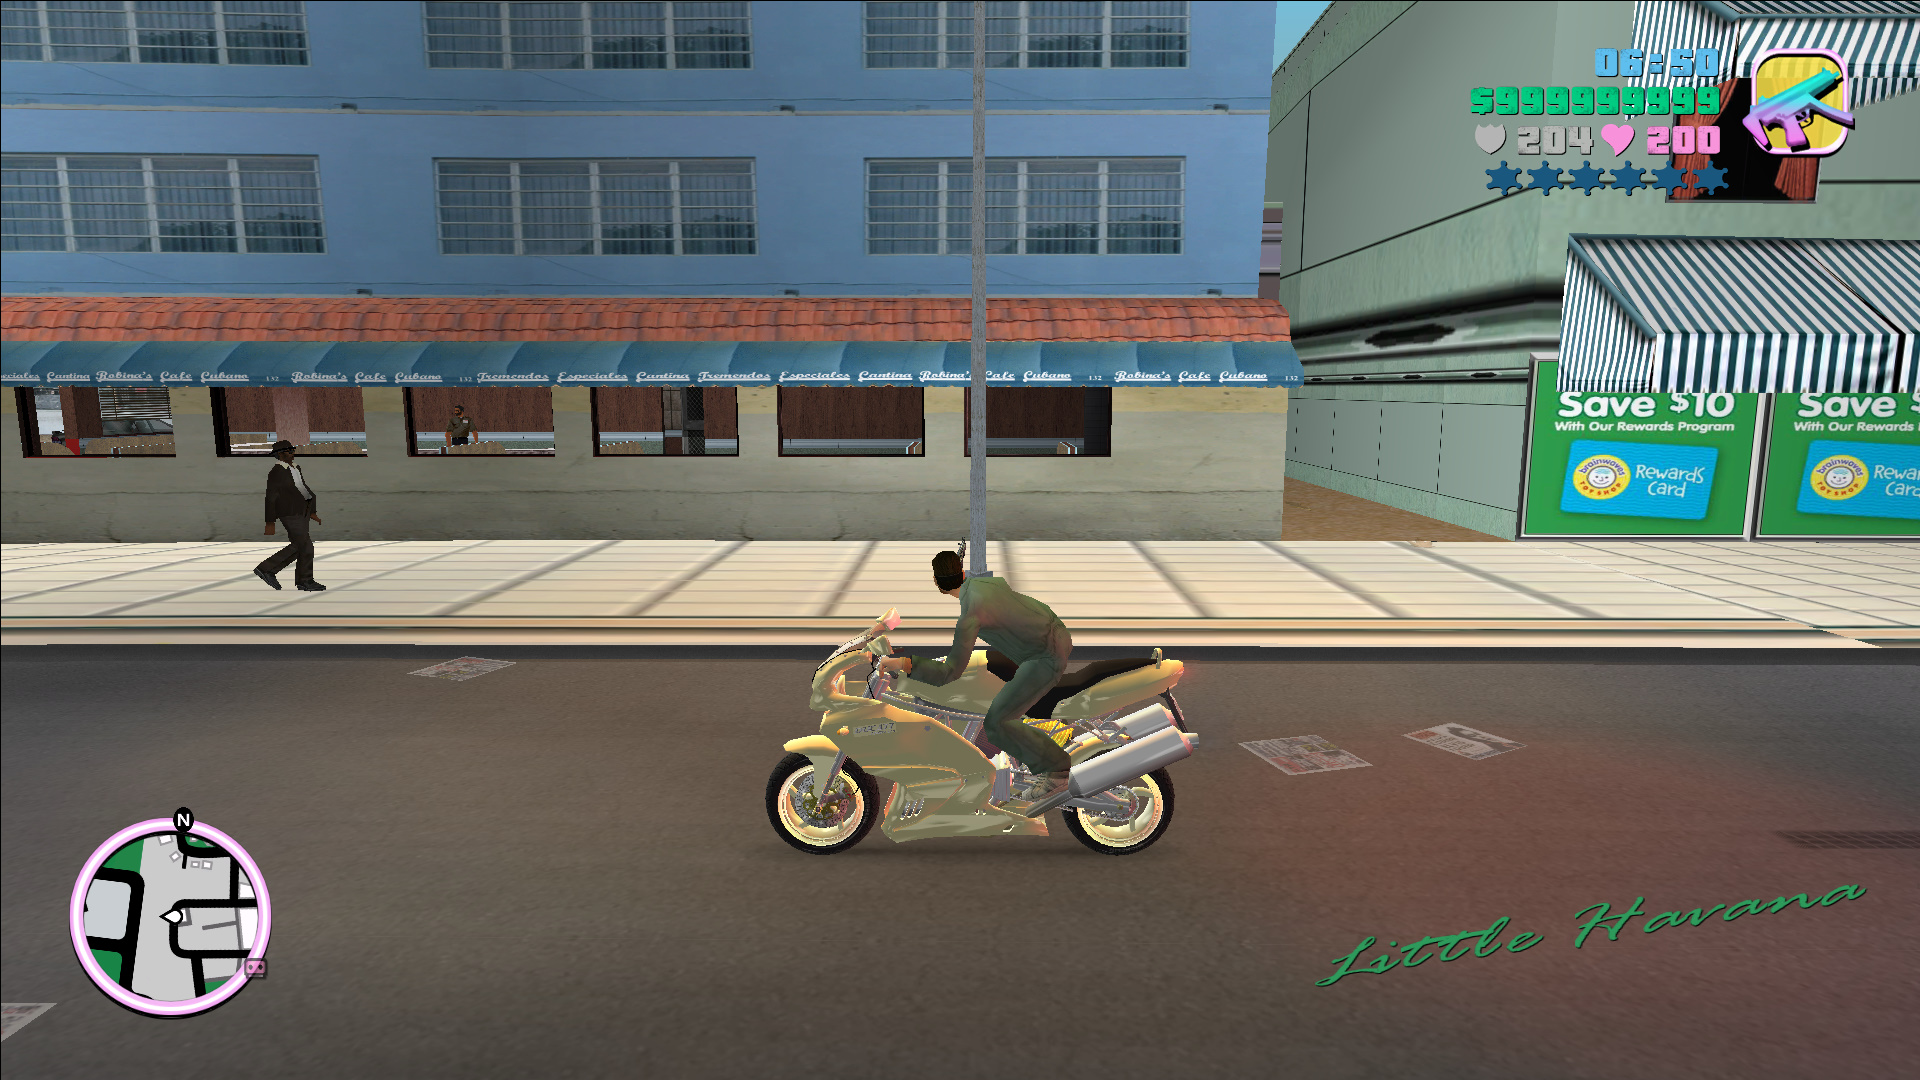 Gta vice city gameplay in android screenshots